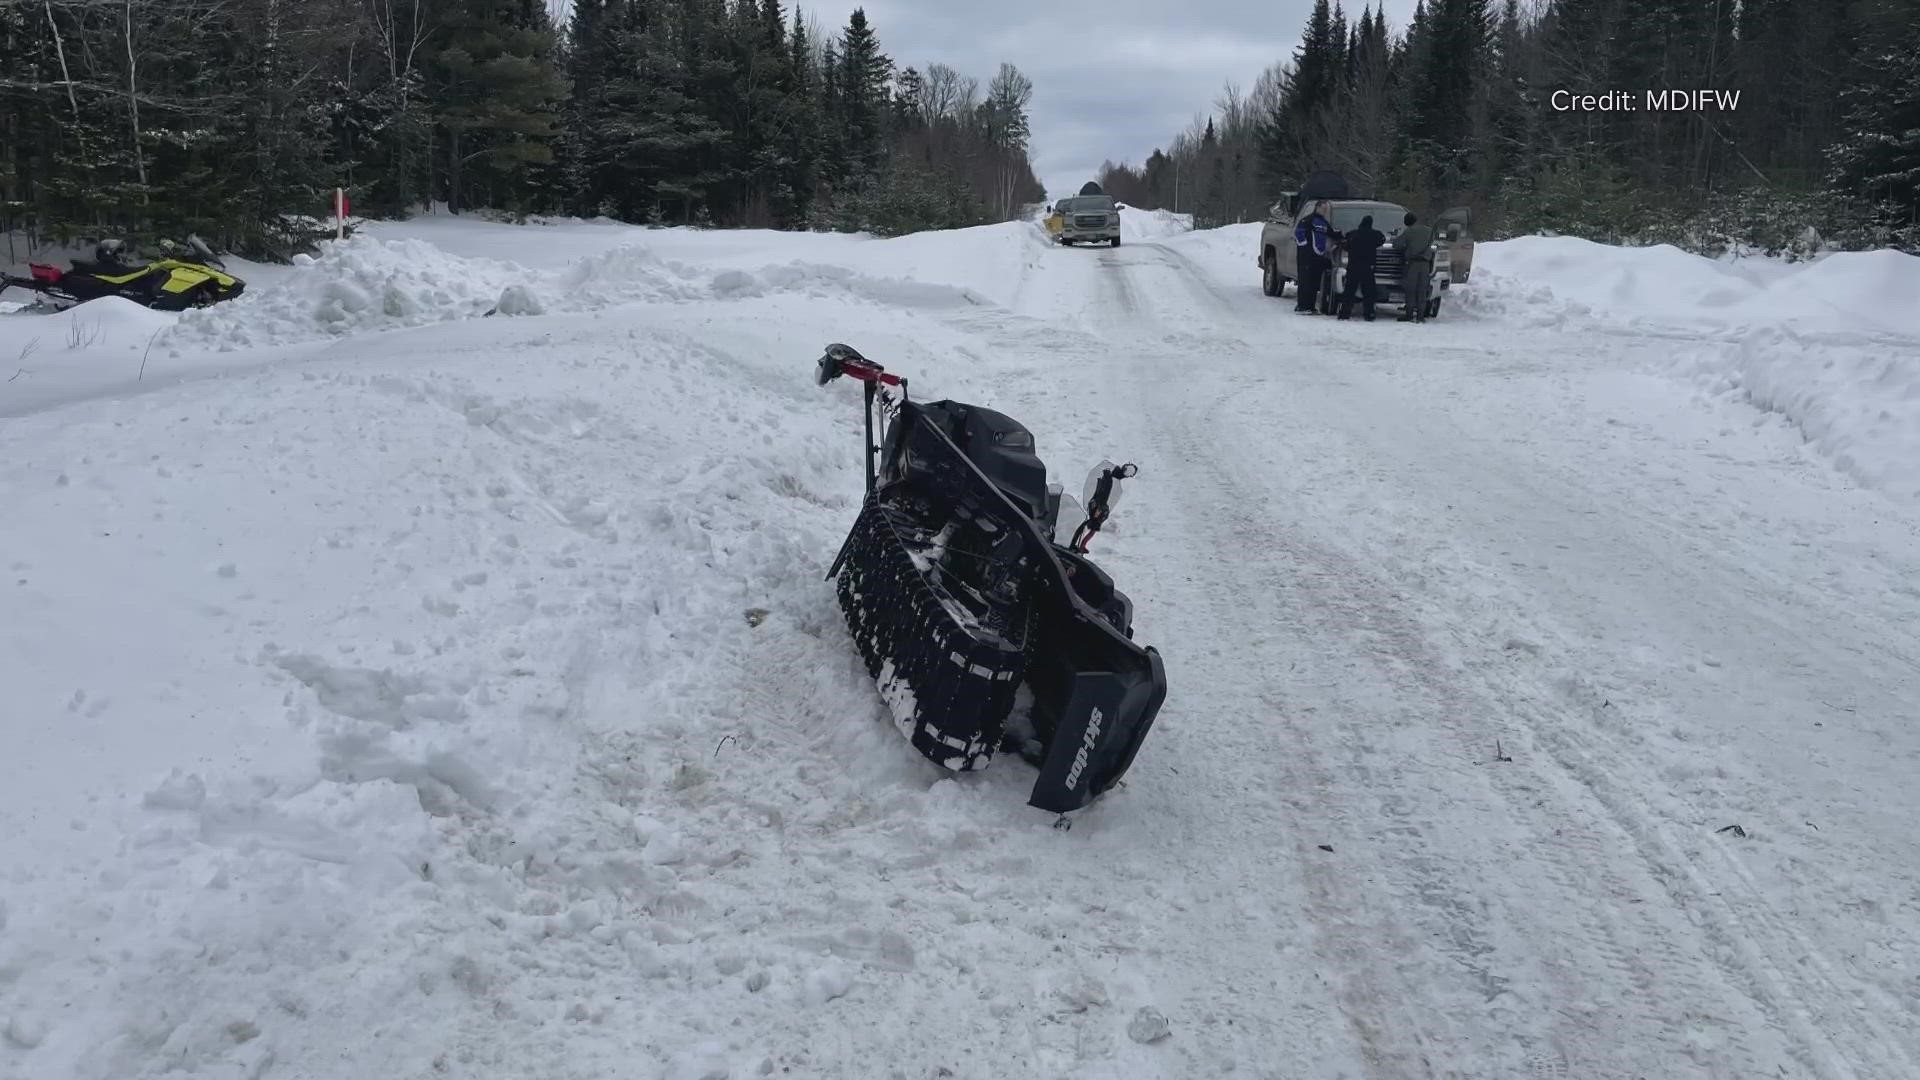 The snowmobile driver failed to stop at the crossing on Grand Lake Road Tuesday afternoon, according to the Maine Department of Inland Fisheries & Wildlife.